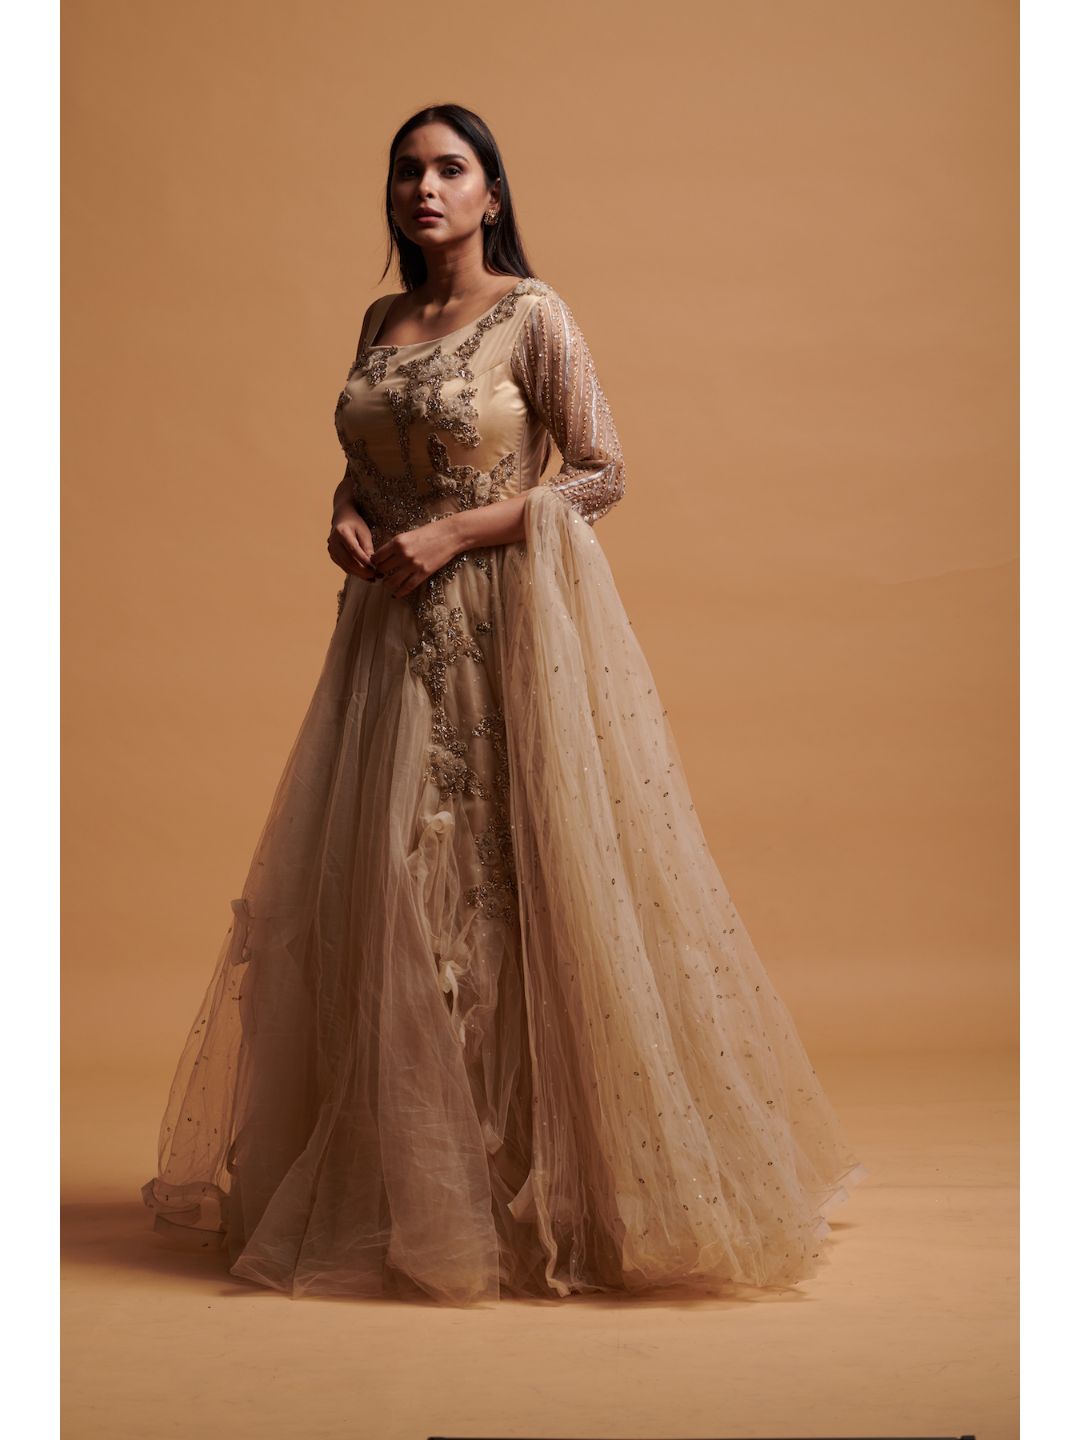 Party Wear Gowns: Buy Designer Gowns for Party Online - Kalki Fashion |  Beige cocktail dresses, Gowns, Ball gowns